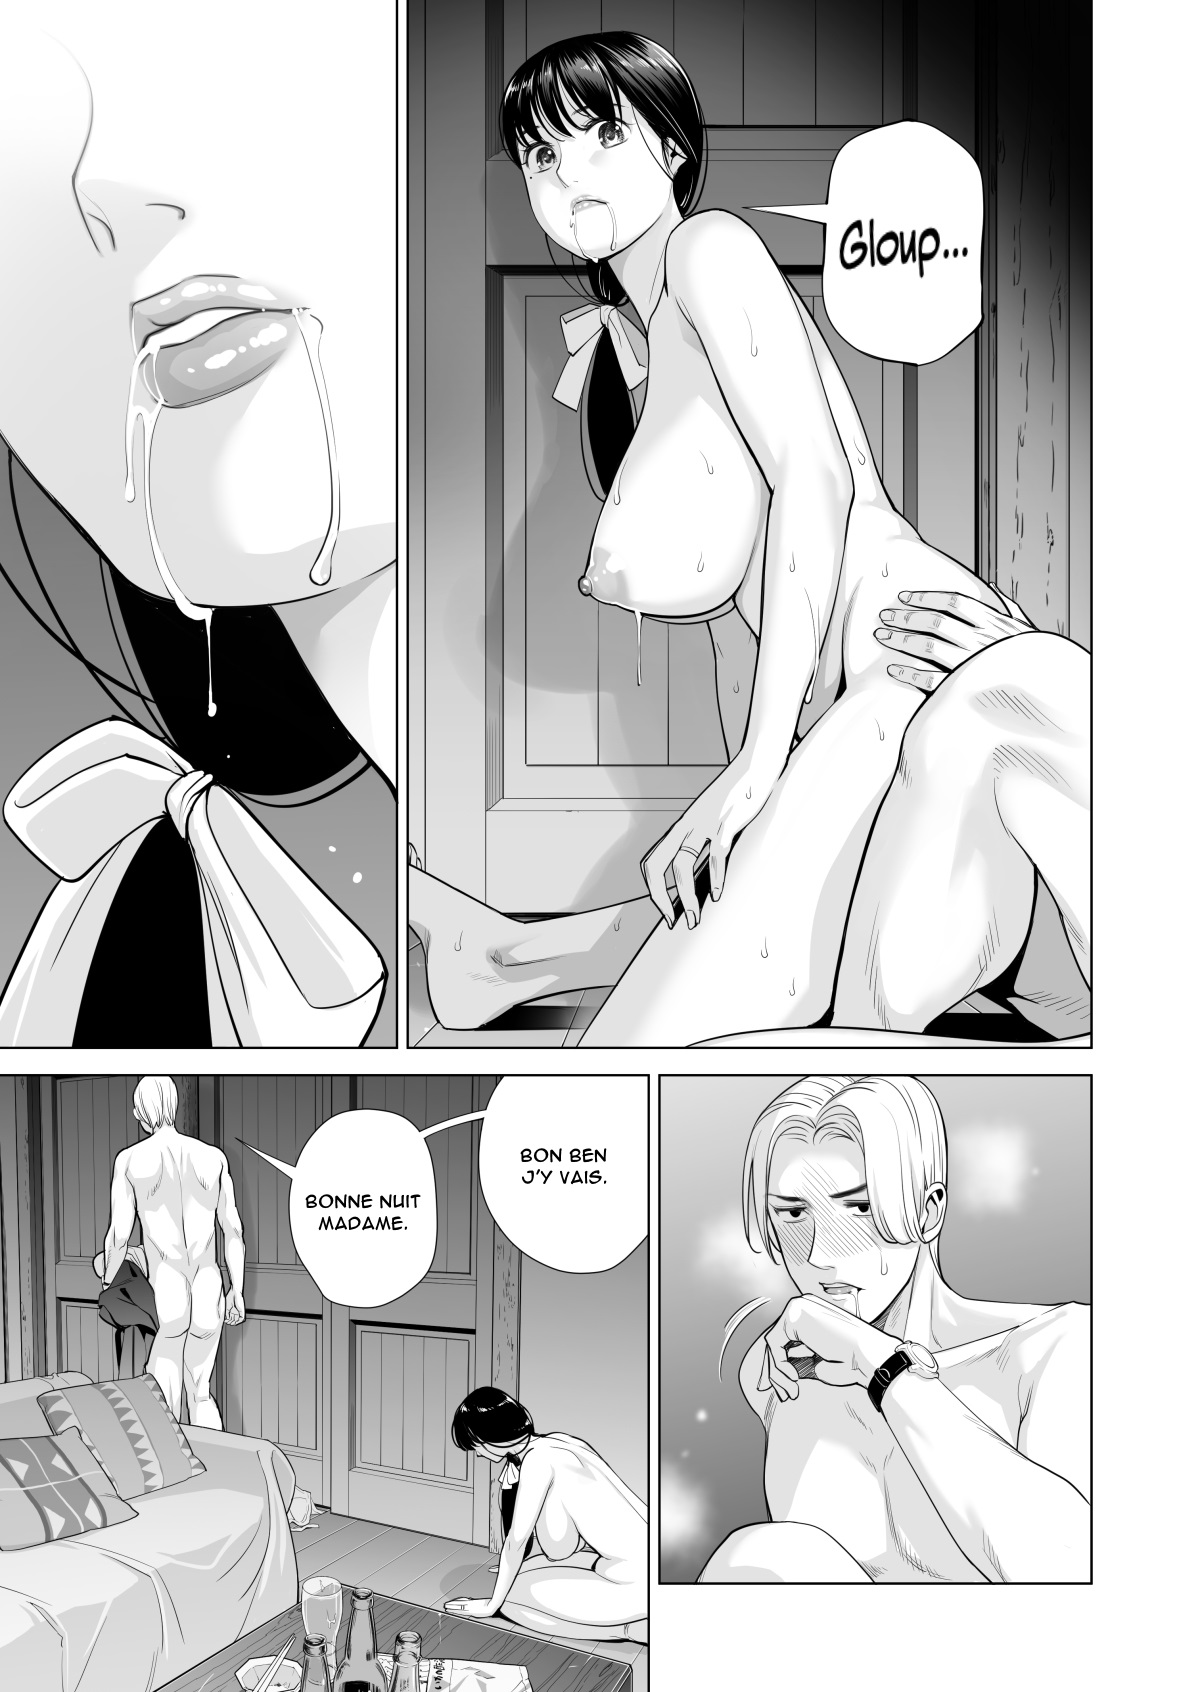 Tsukiyo no Midare Zake  Moonlit Intoxication ~ A Housewife Stolen by a Coworker Besides her Blackout Drunk Husband ~ Chapter 1 numero d'image 59